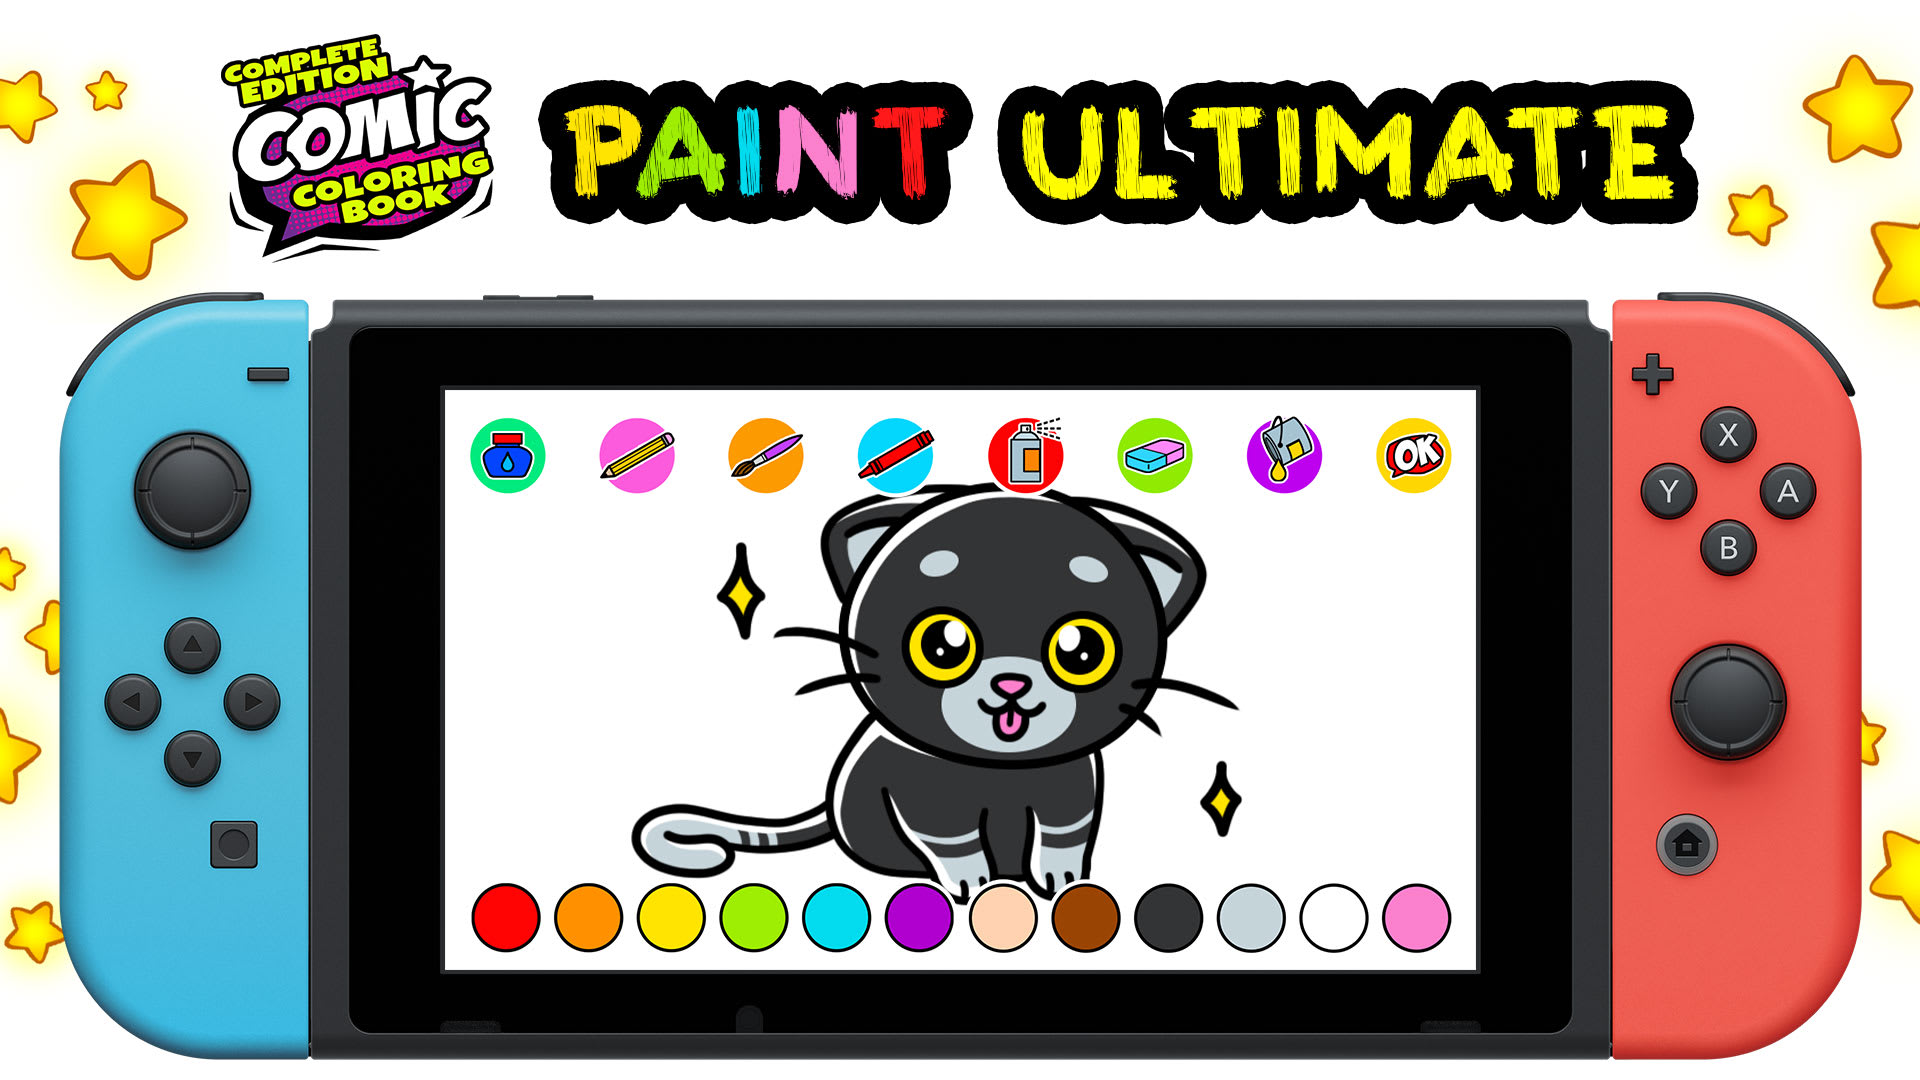 Comic Coloring Book Complete Edition: PAINT Ultimate 1